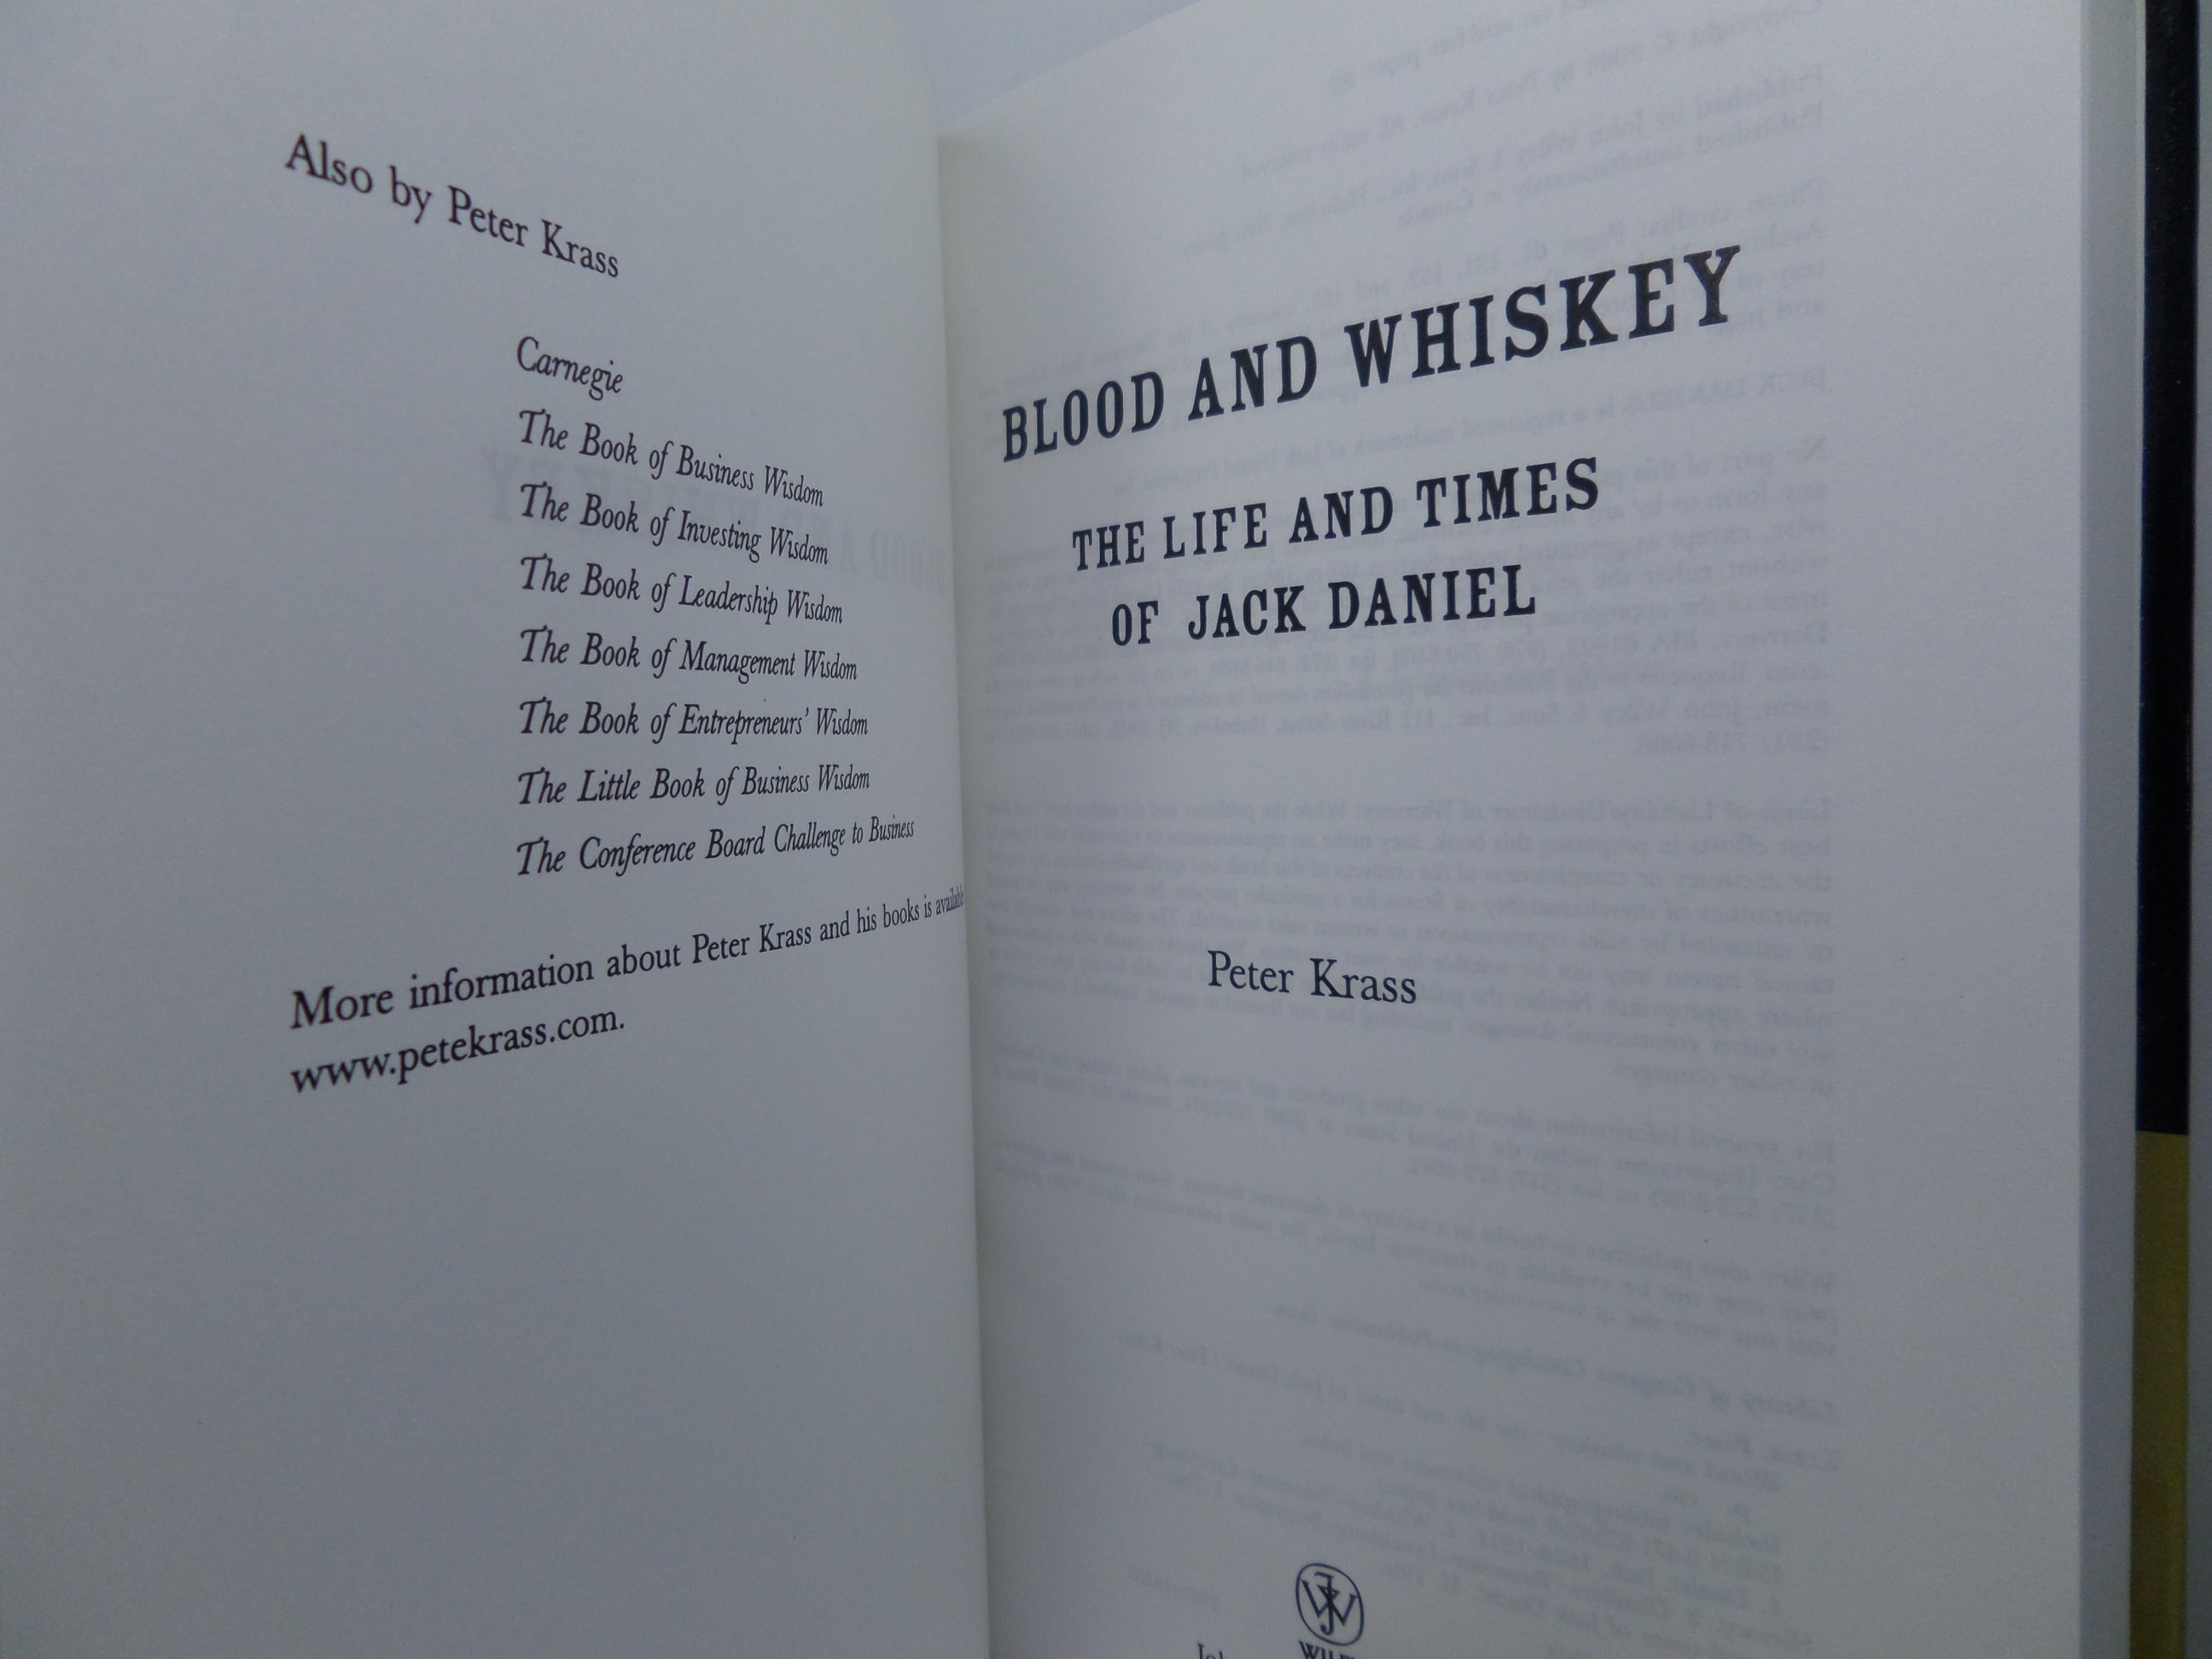 BLOOD & WHISKEY: THE LIFE AND TIMES OF JACK DANIEL BY PETER KRASS 2004 HARDCOVER